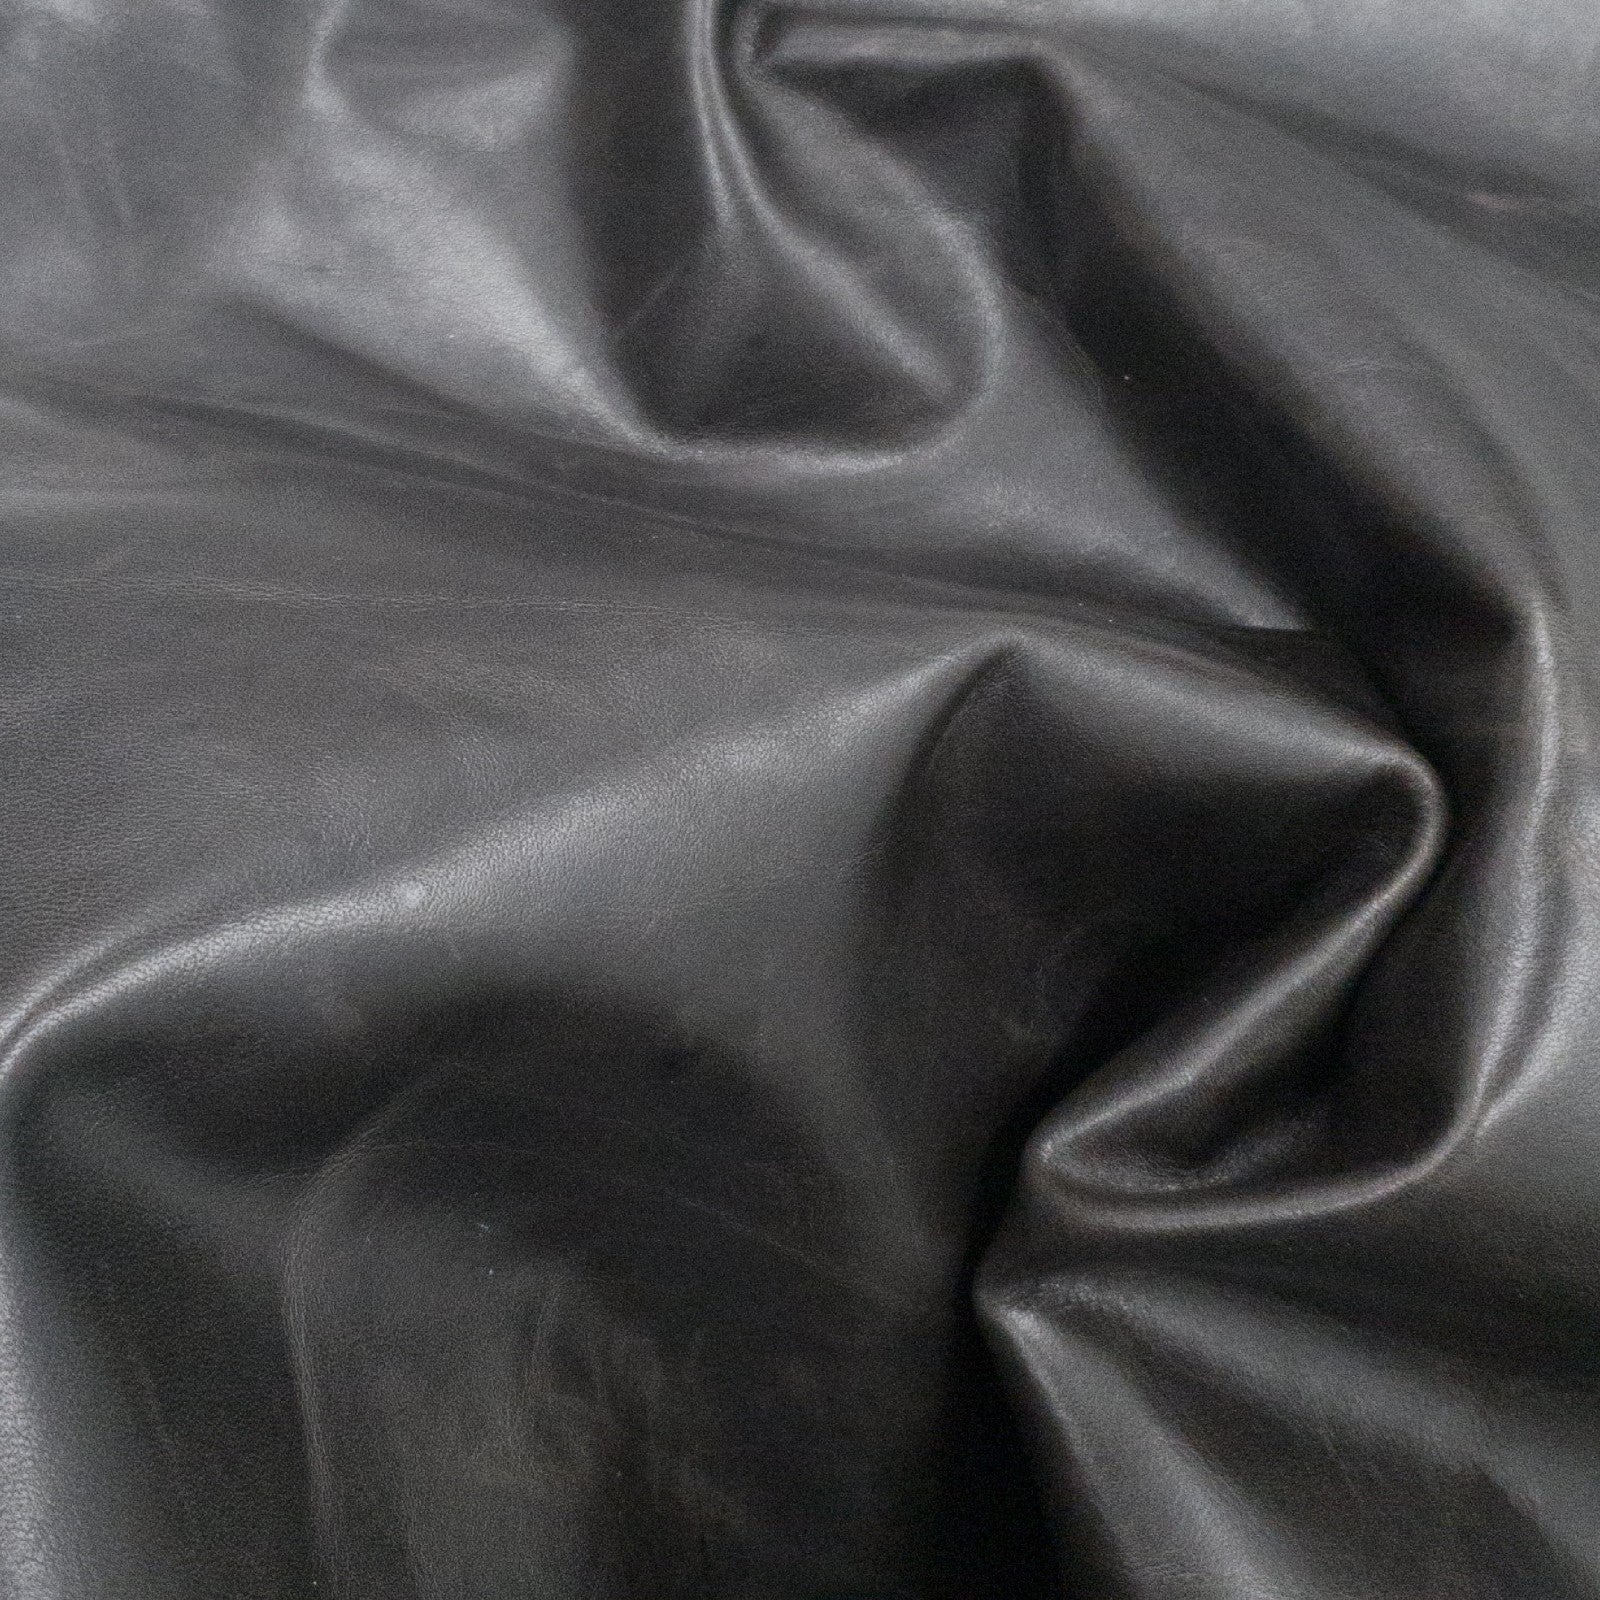 Greys and Black, 2-4 oz, 3-10 Sq Ft, Upholstery Cow Project Pieces, Grey 4 (2-3 oz) / 3-6 Sq ft | The Leather Guy